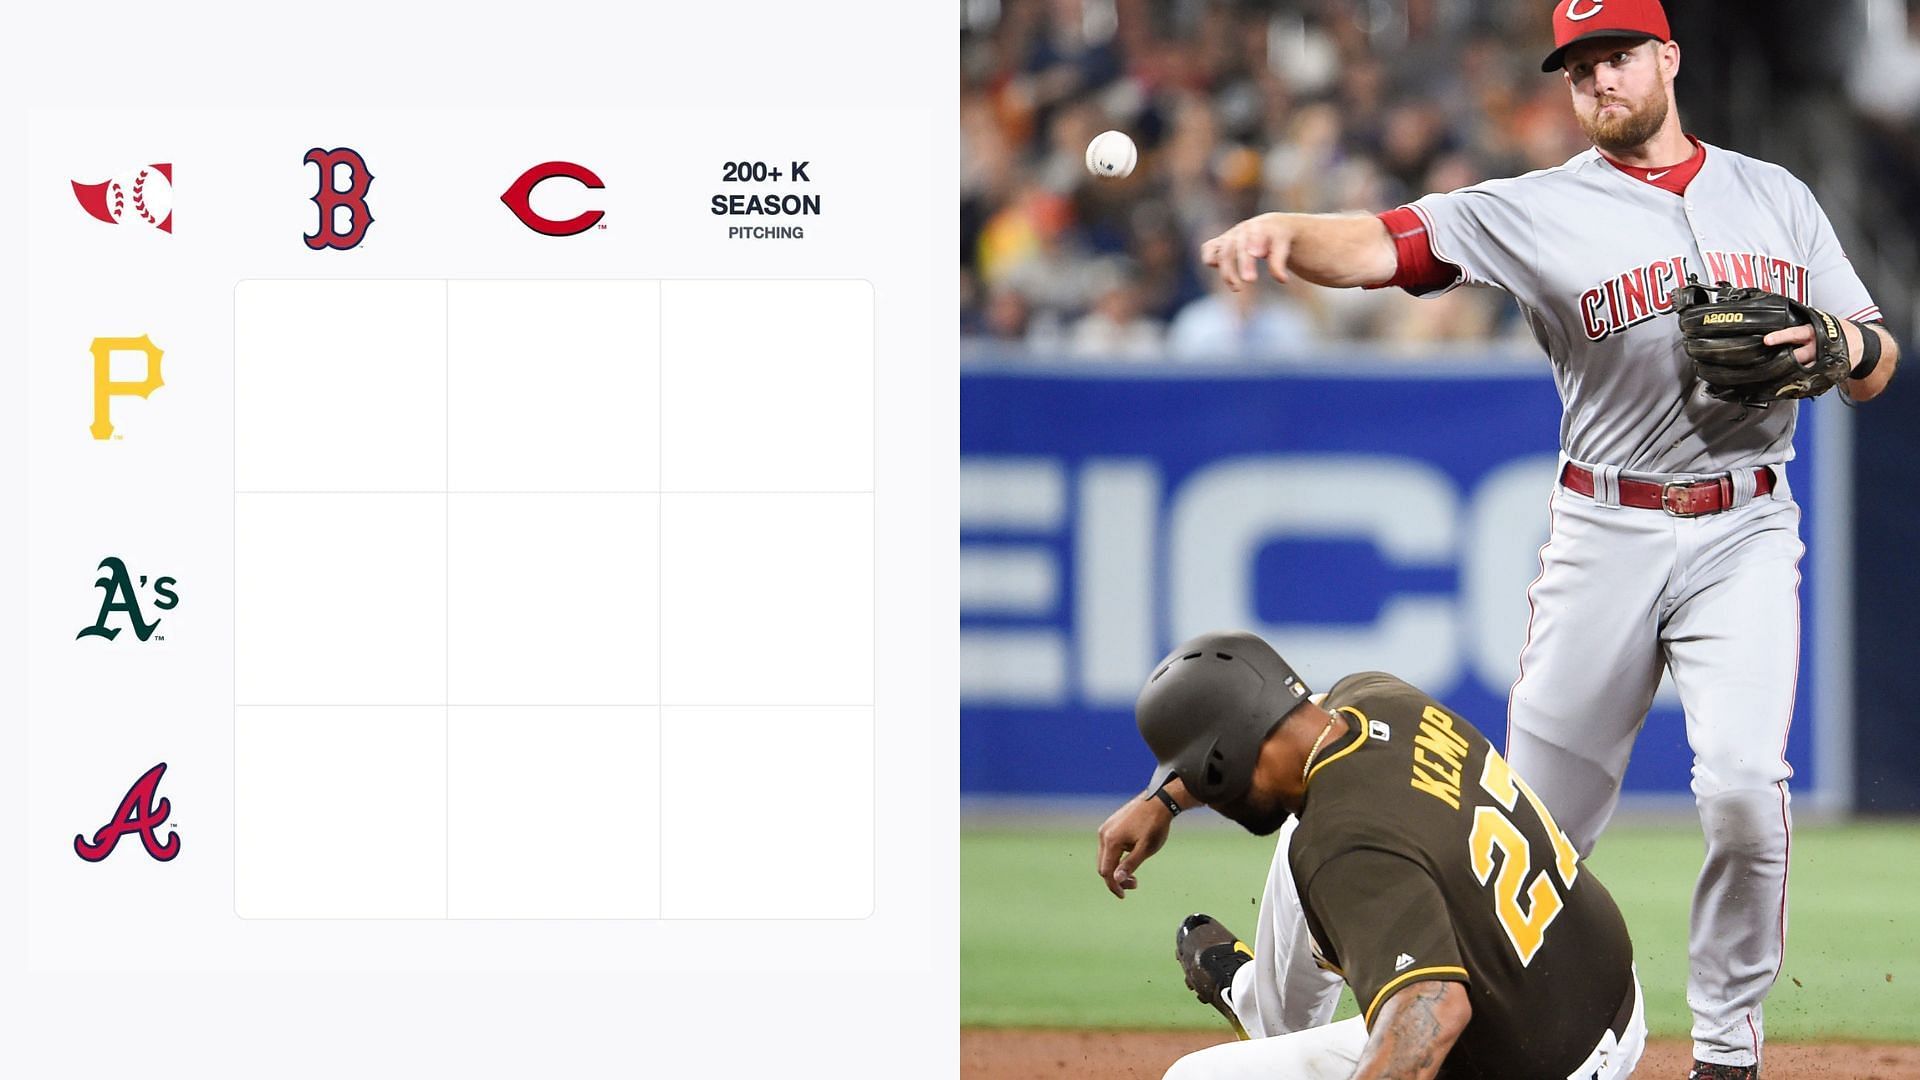 MLB on X: That 70 Show! The @Braves are the first team in MLB to